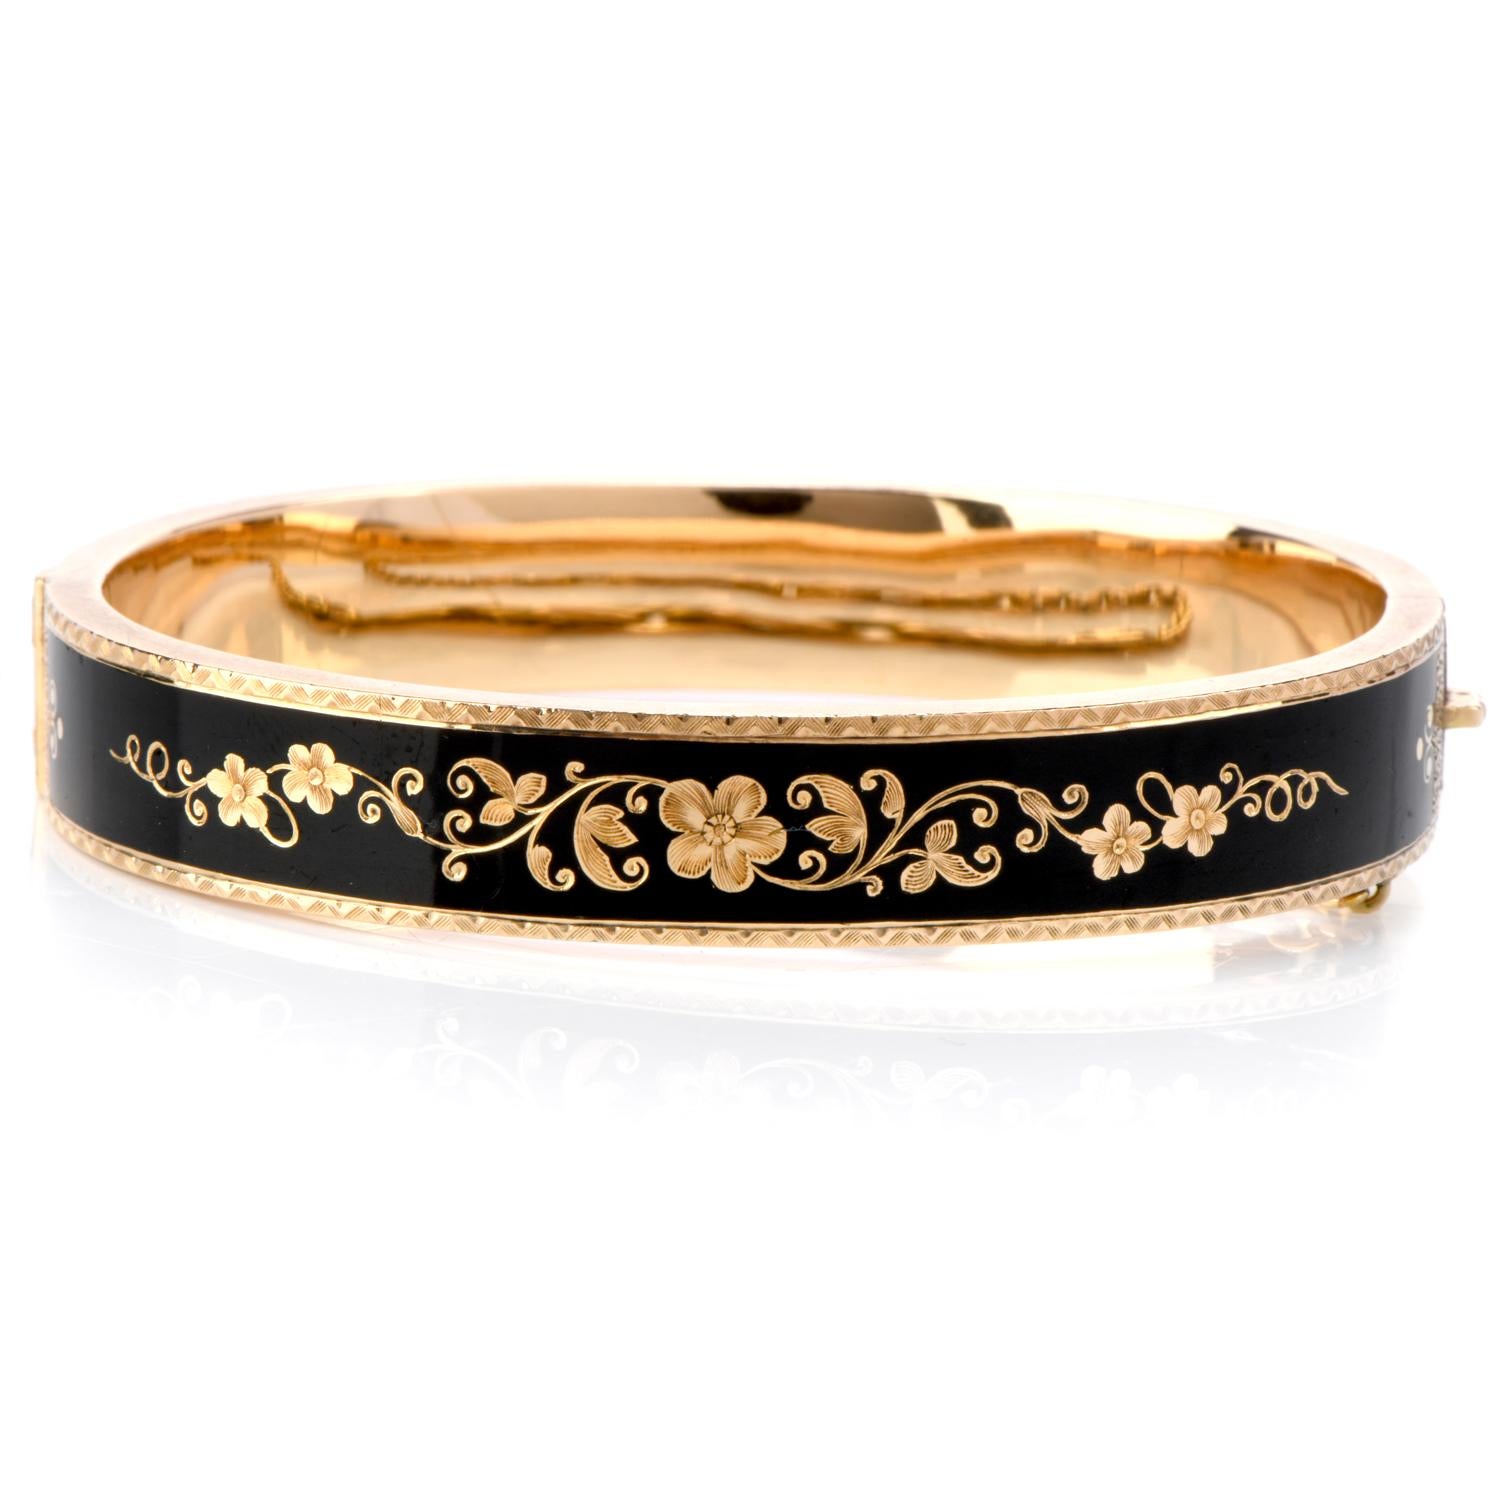 Honor the beloved Victorian Era with this Antique Black Enamel 14K yellow Gold Bangle Bracelet!

This bracelet displays a beautiful and intricate Victorian design on the deep black enamel background.  It weighs in at 16.2

grams and measures at a 6